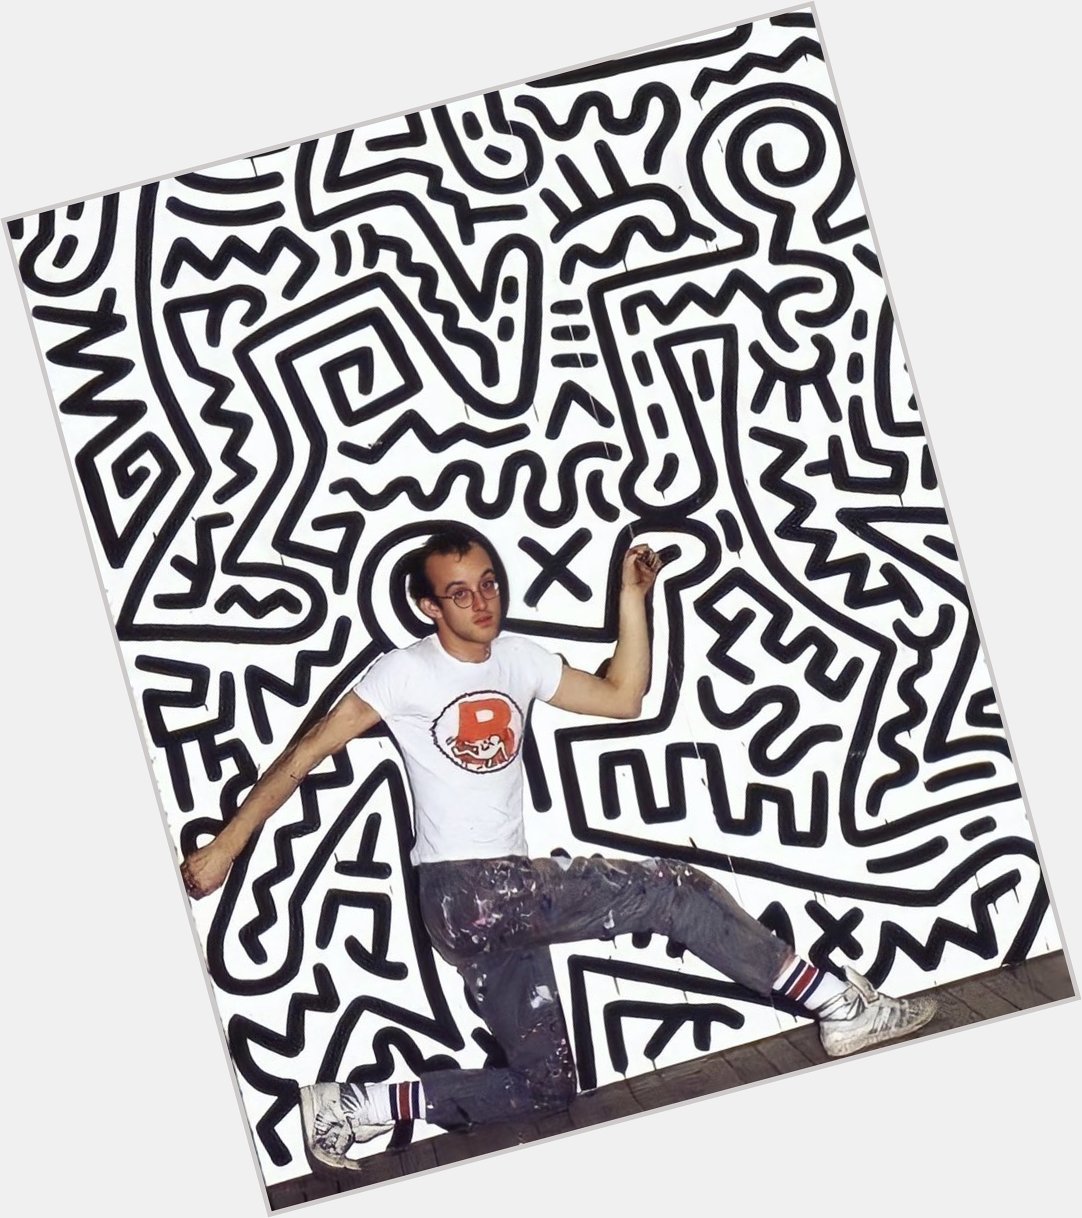 Happy Birthday, Keith Haring! The legendary artist and activist would have been 63 years old today. 